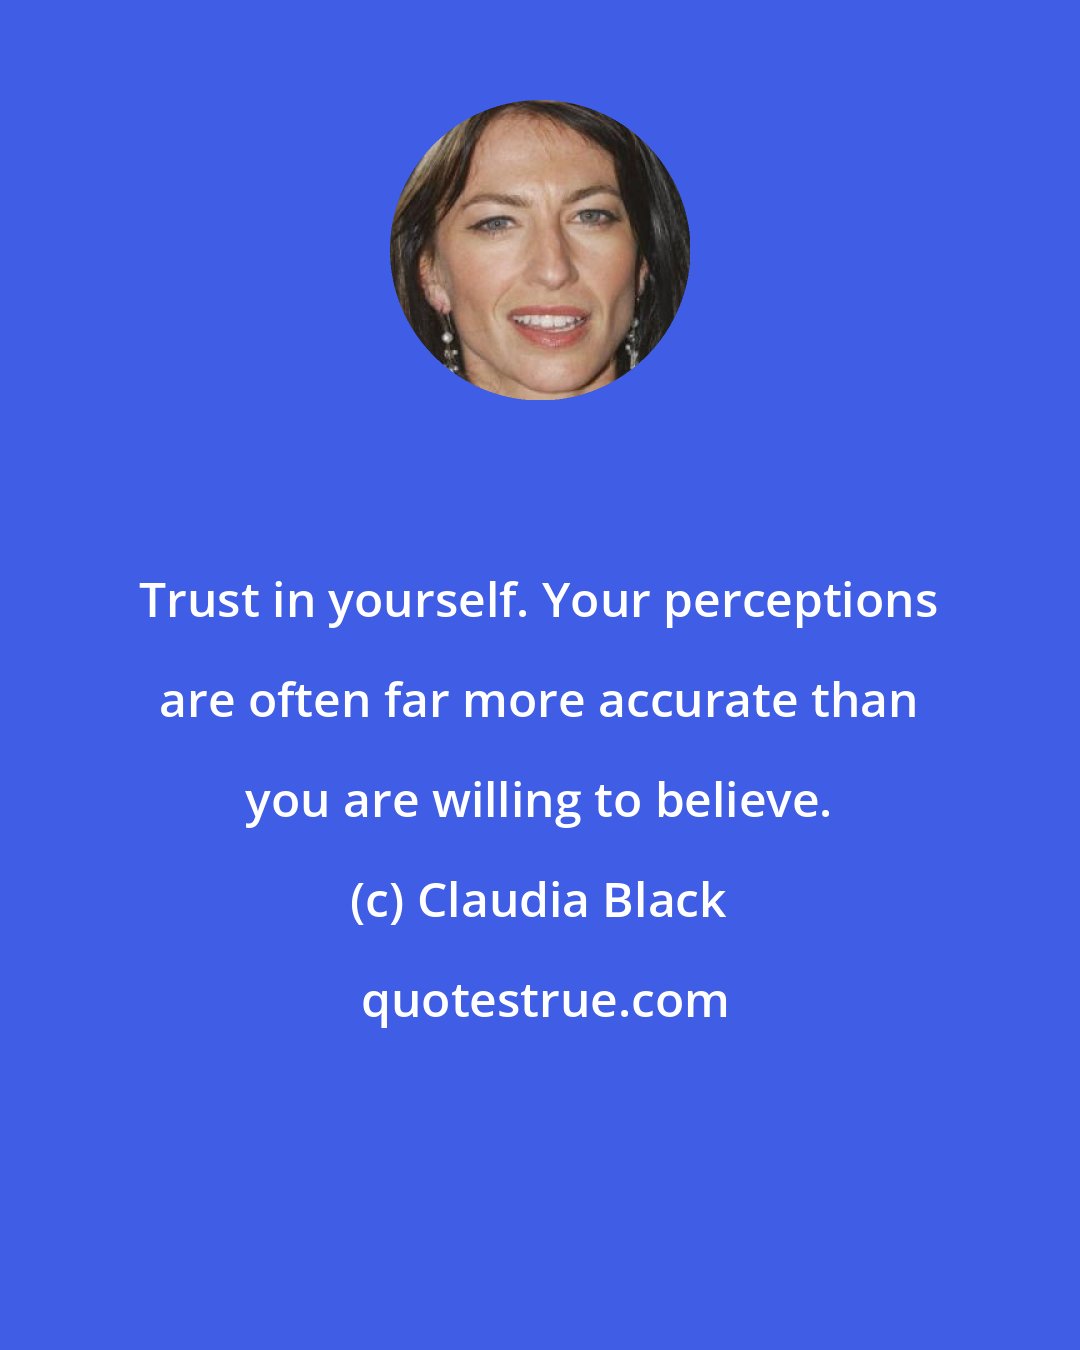 Claudia Black: Trust in yourself. Your perceptions are often far more accurate than you are willing to believe.